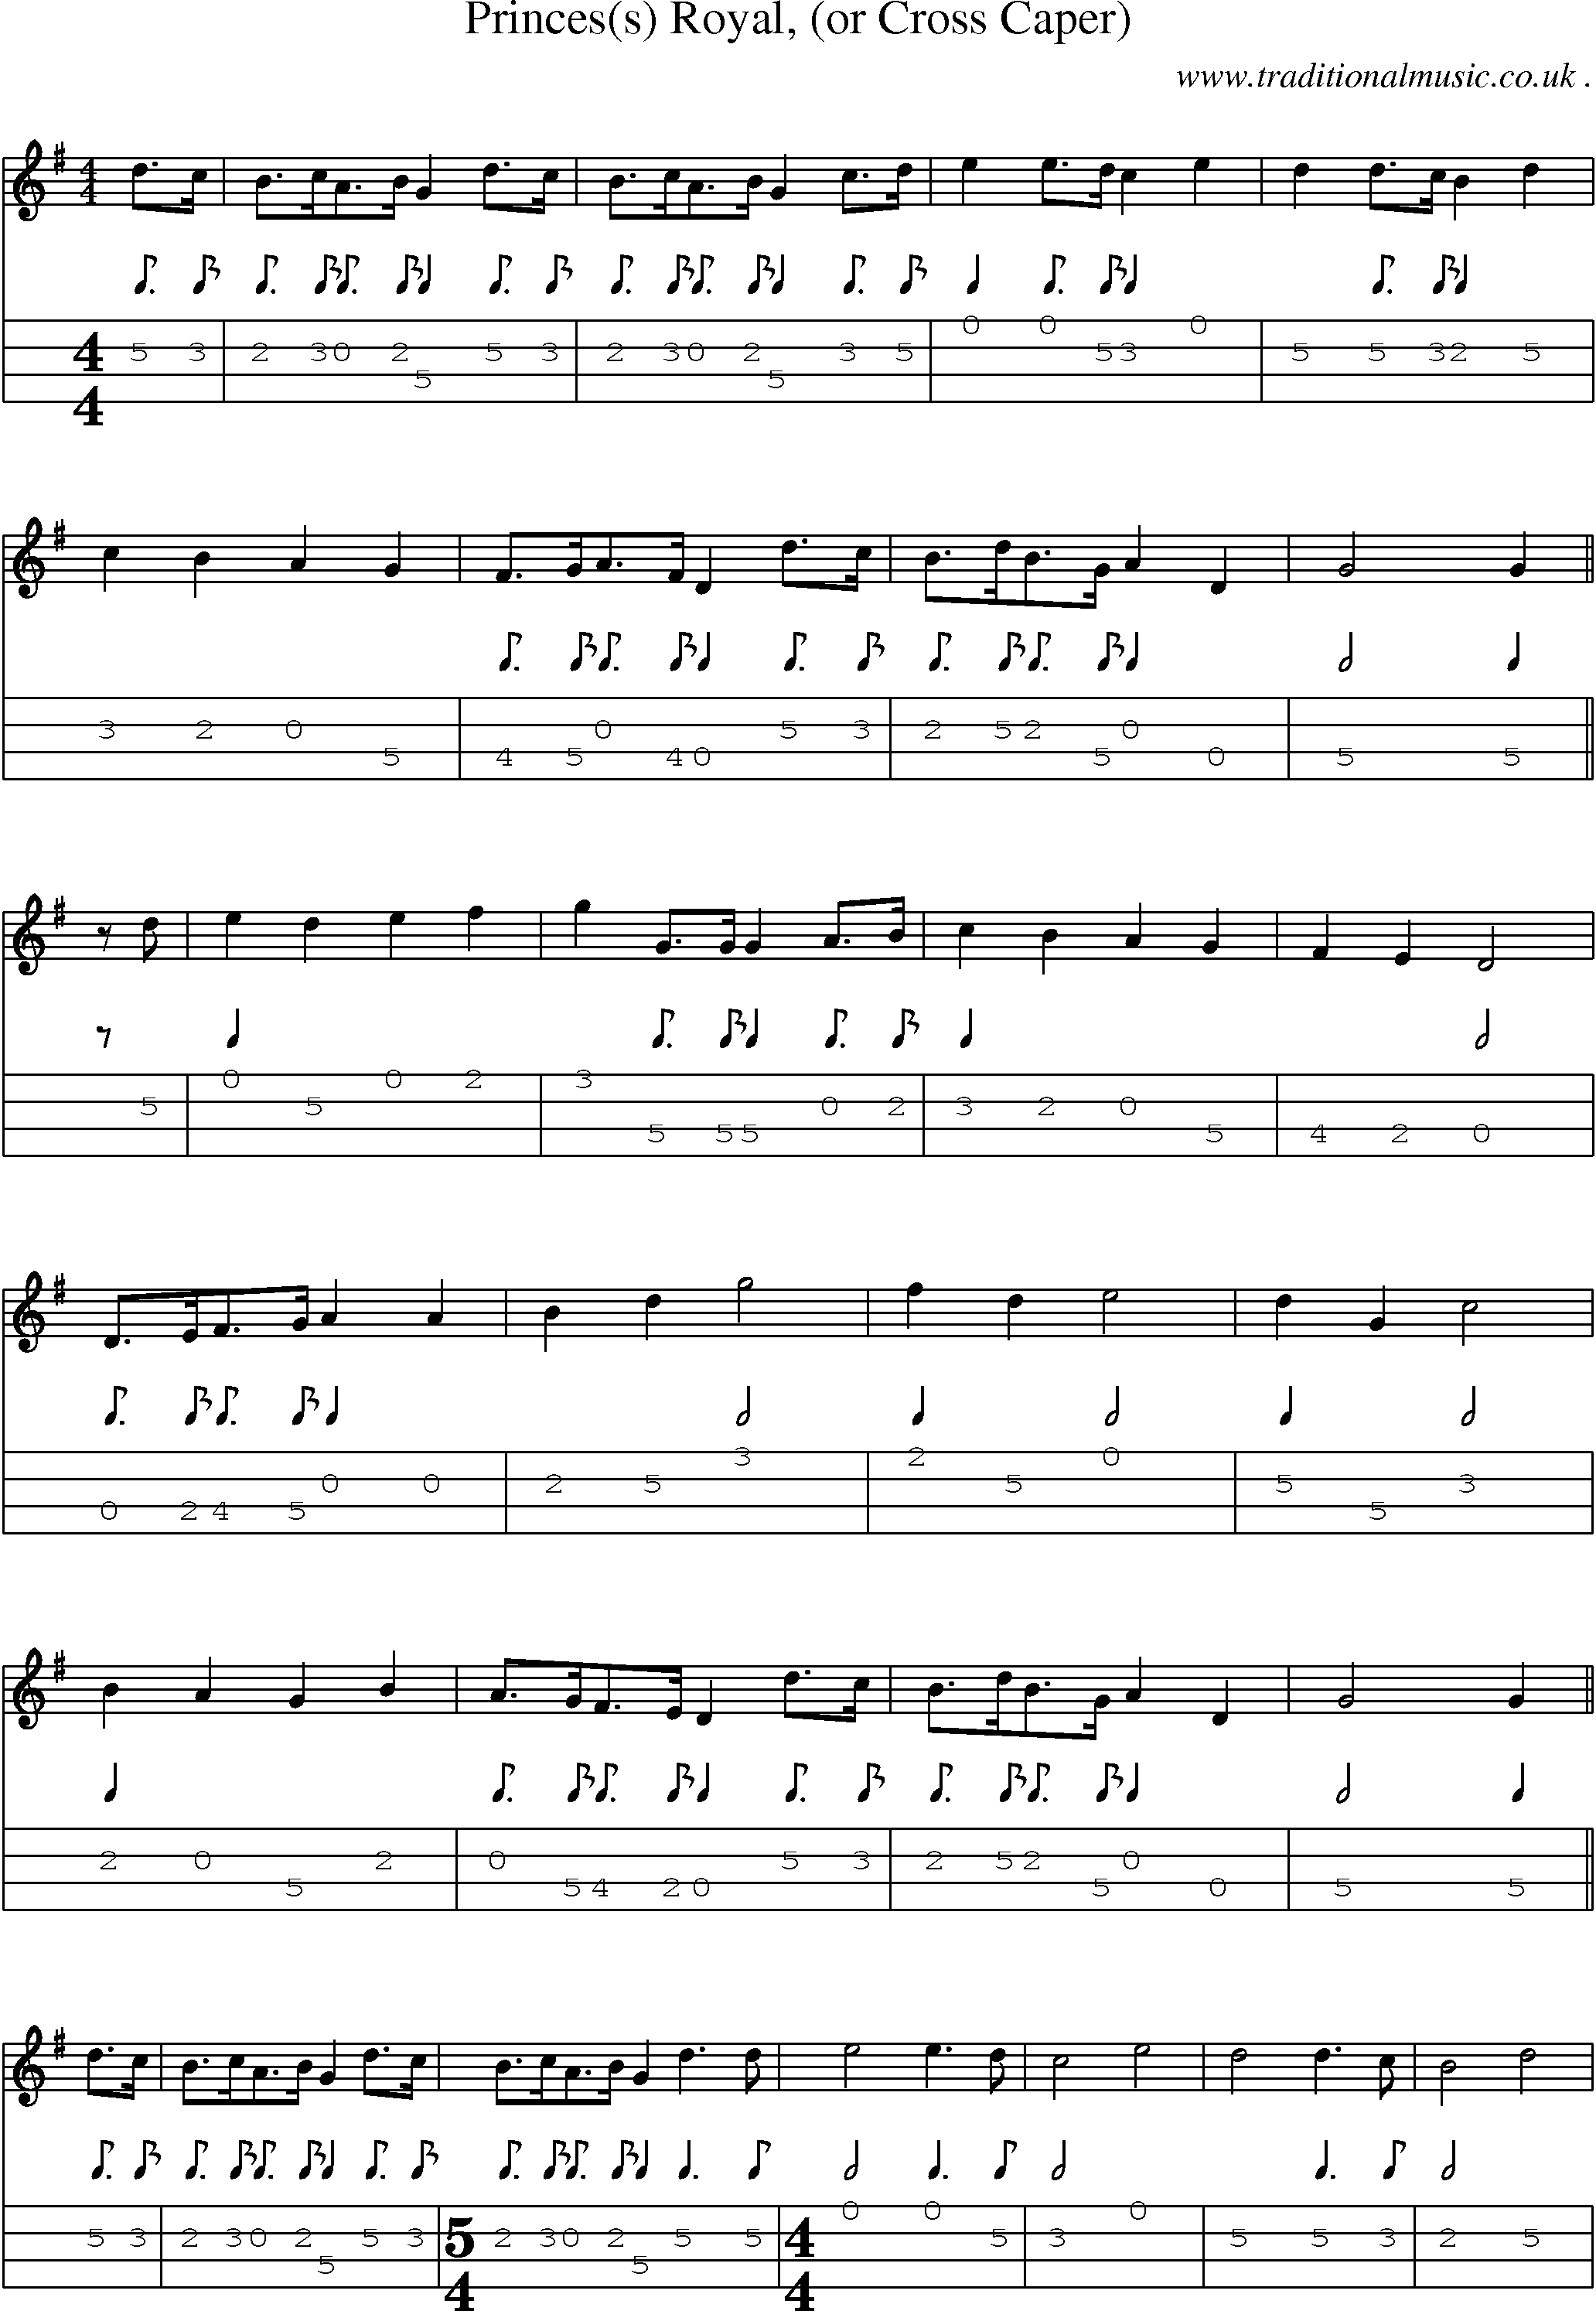 Sheet-Music and Mandolin Tabs for Princes(s) Royal (or Cross Caper)